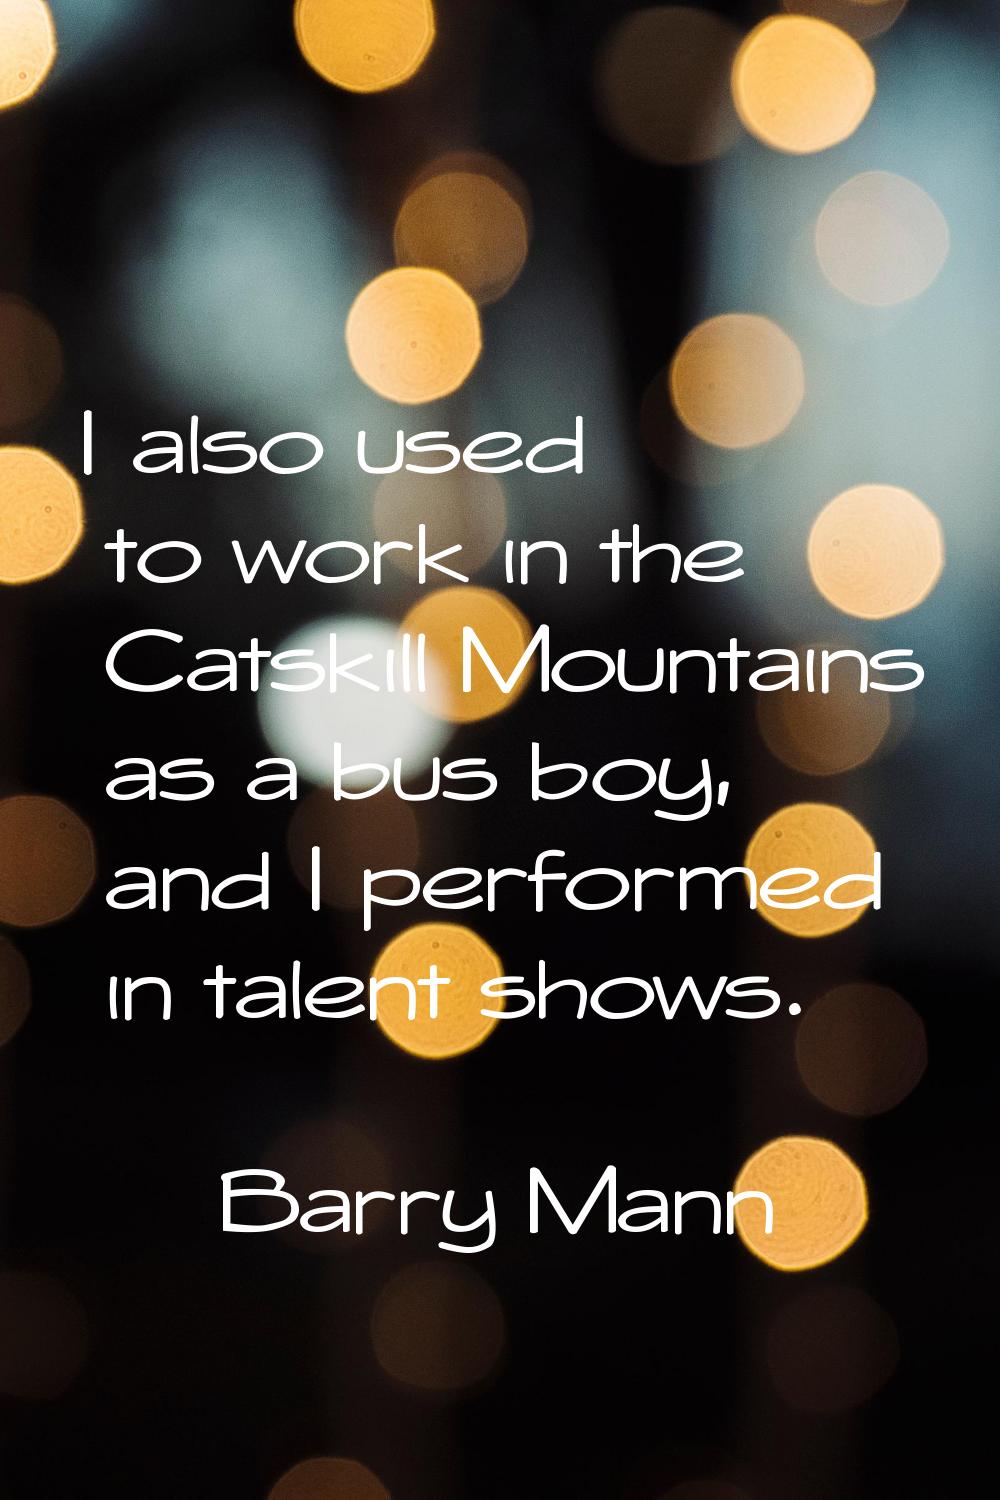 I also used to work in the Catskill Mountains as a bus boy, and I performed in talent shows.